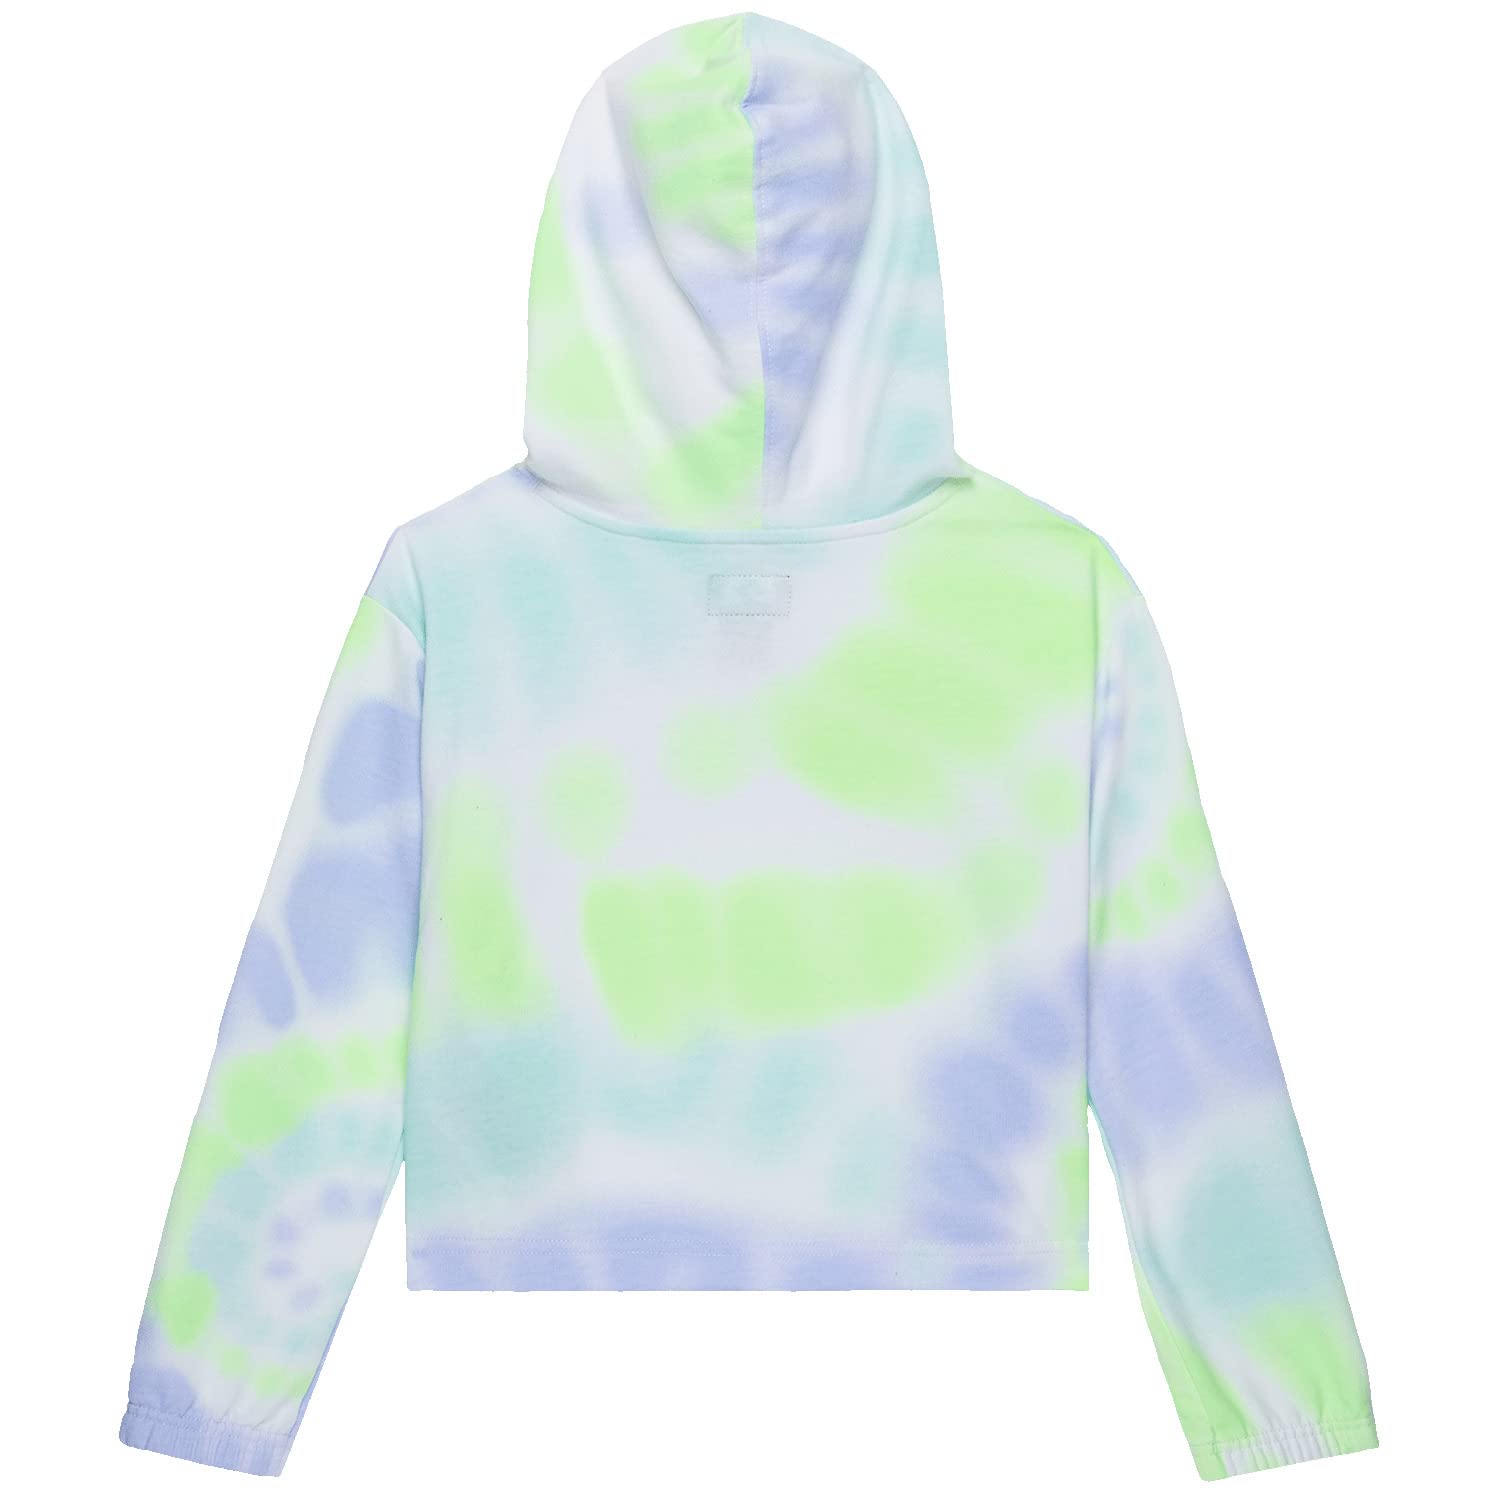 Image 2 of All Over Print Tie-Dye Boxy Hoodie (Toddler/Little Kids)